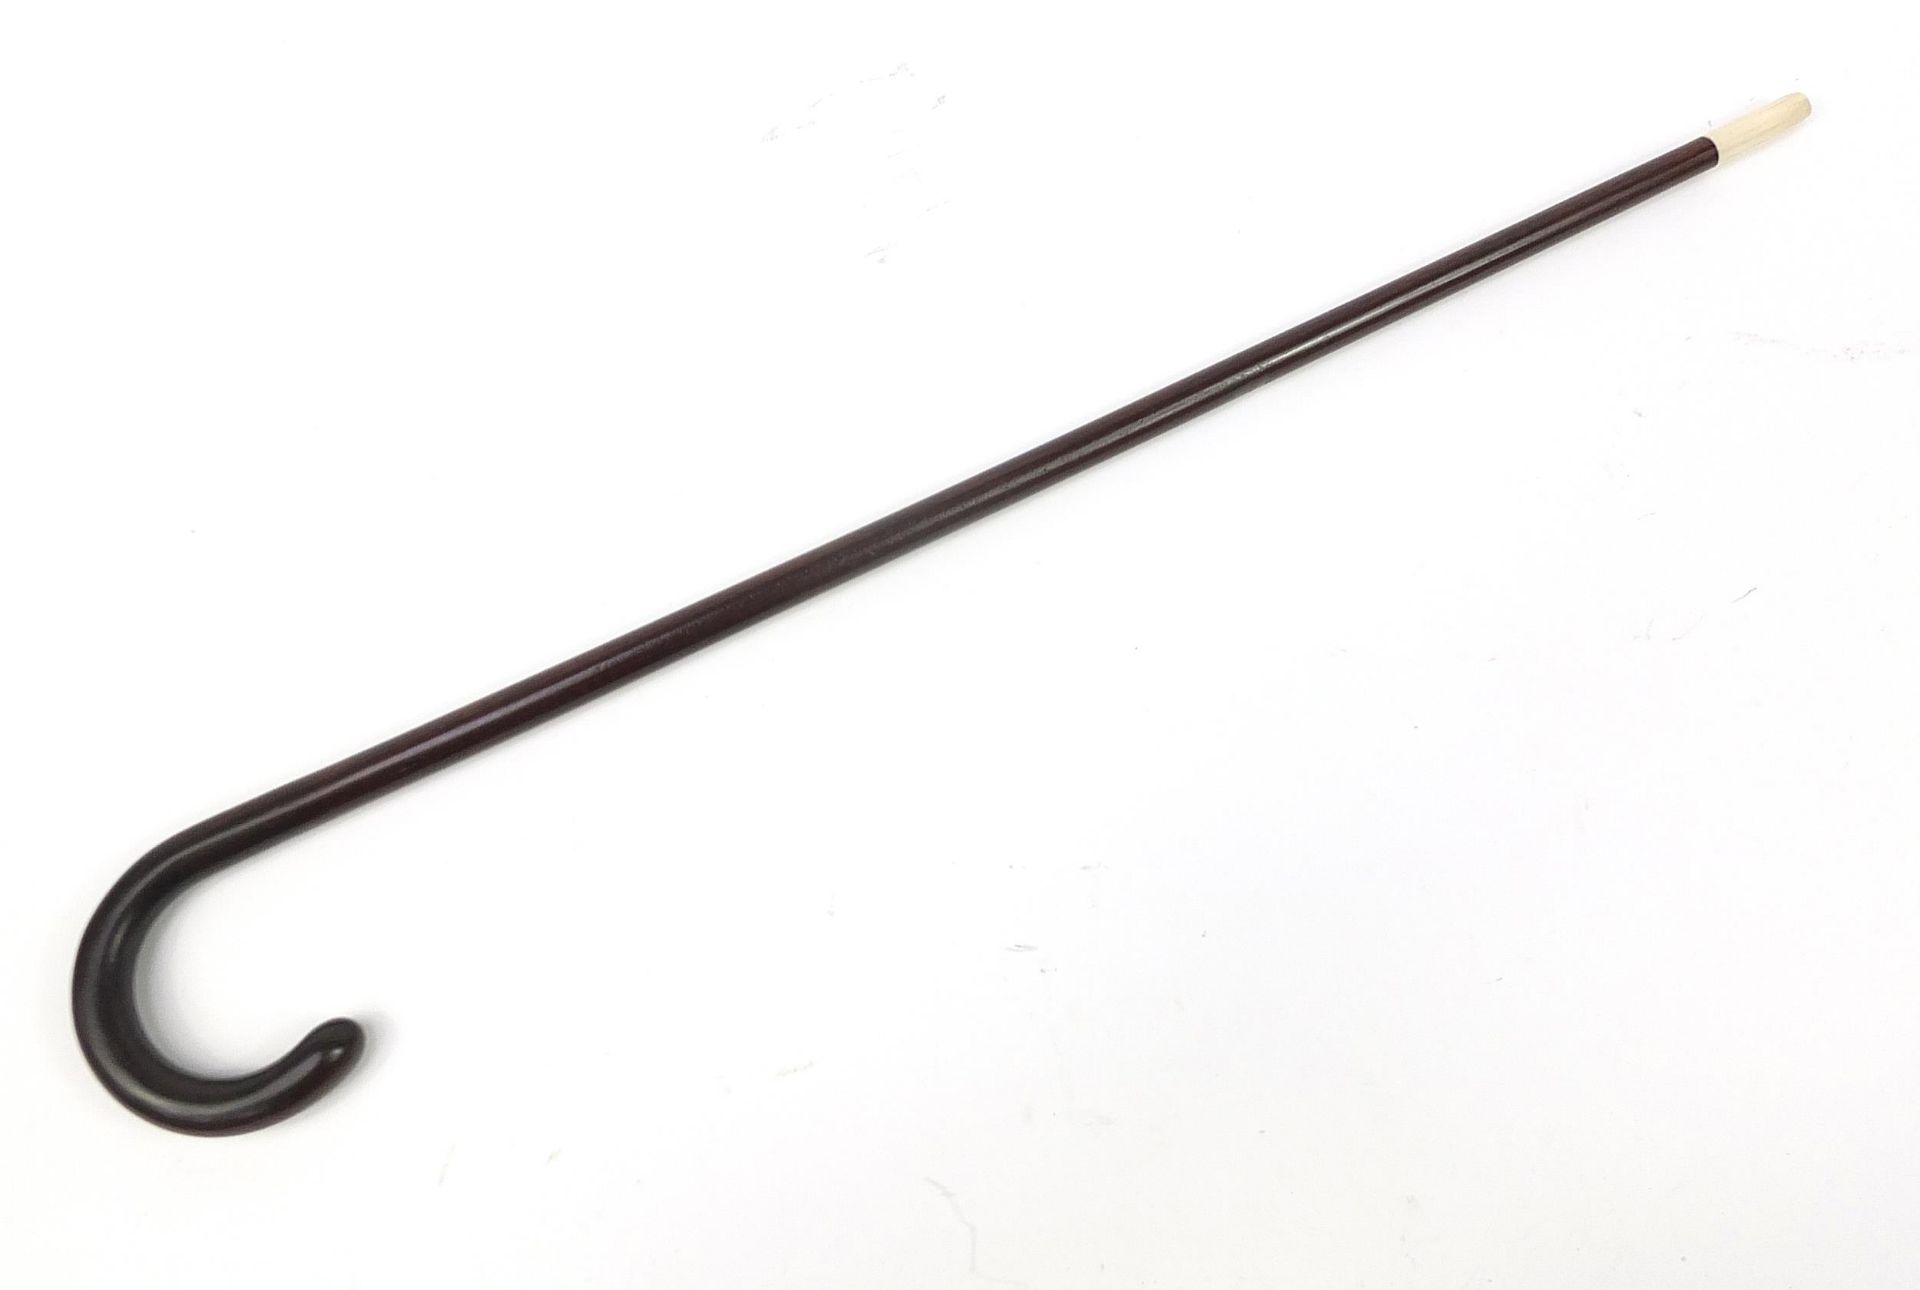 Snakewood walking cane with an ivory ferule, 82cm in length - Image 6 of 6